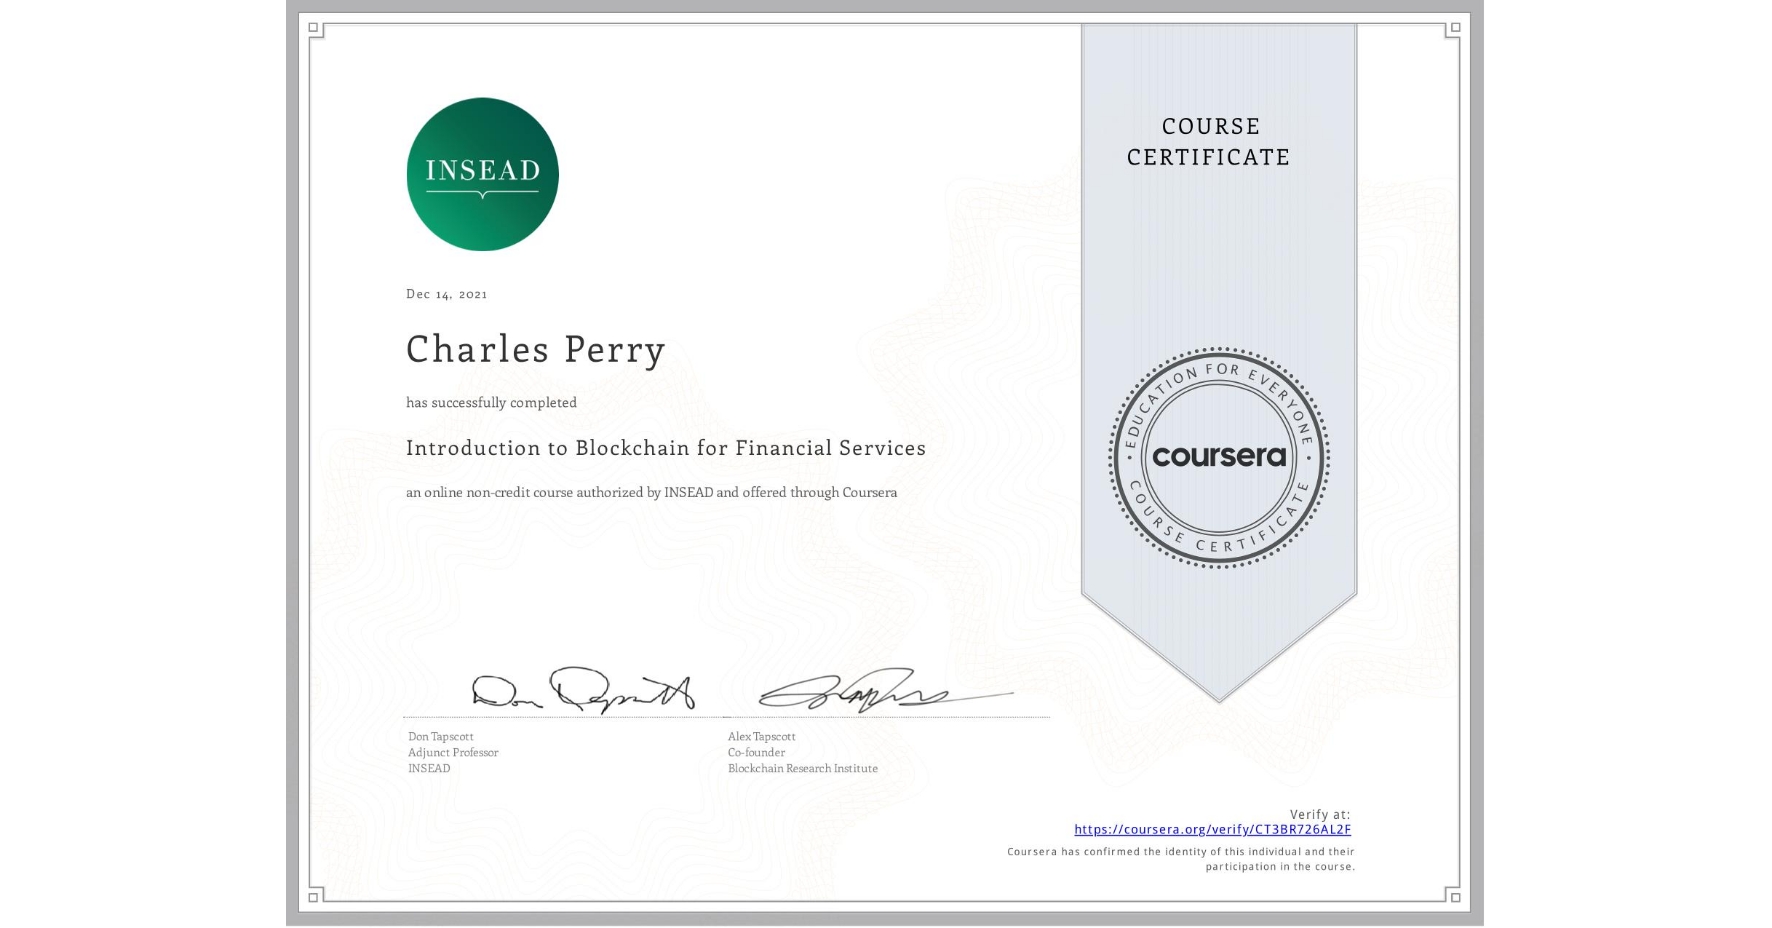 View certificate for Charles Perry, Introduction to Blockchain for Financial Services, an online non-credit course authorized by INSEAD and offered through Coursera